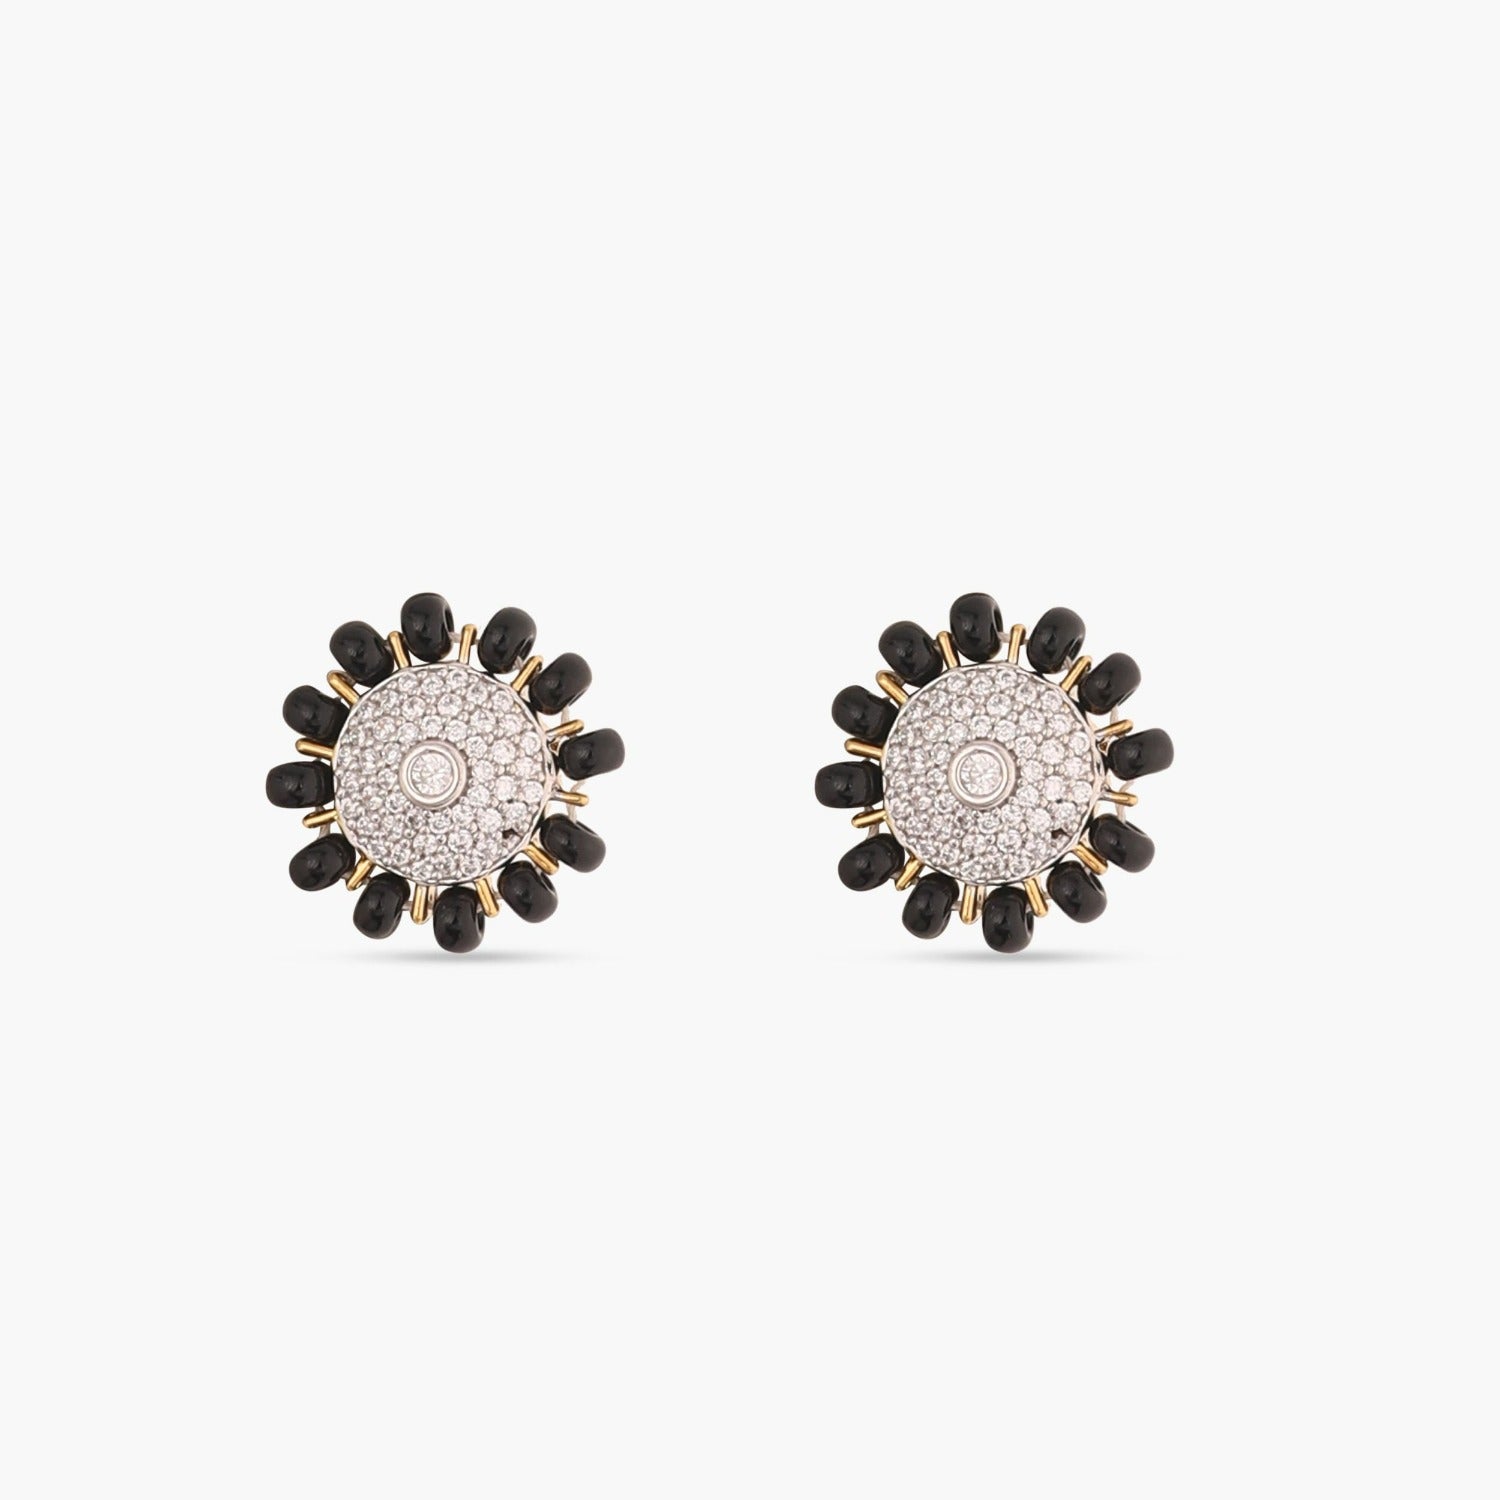 Floral CZ Silver Mangalsutra Stud Earrings